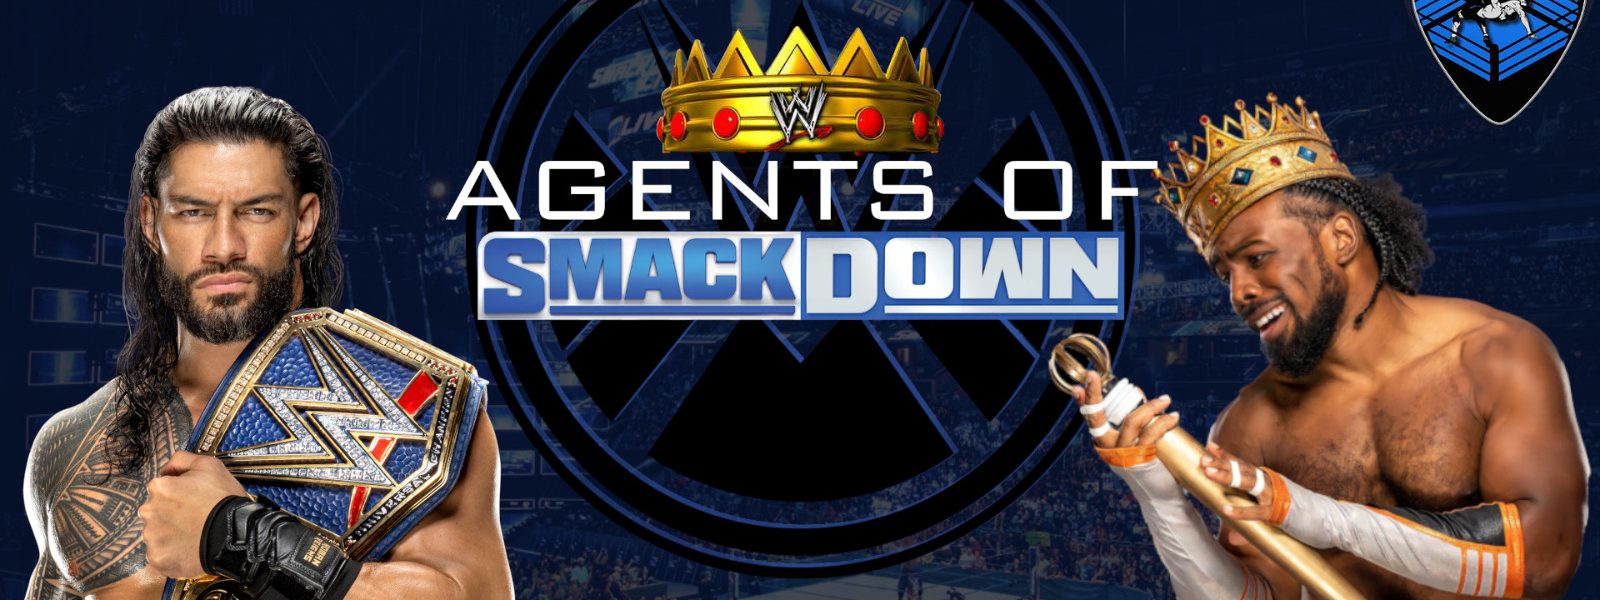 Long live the King - Agents Of Smackdown EP.29